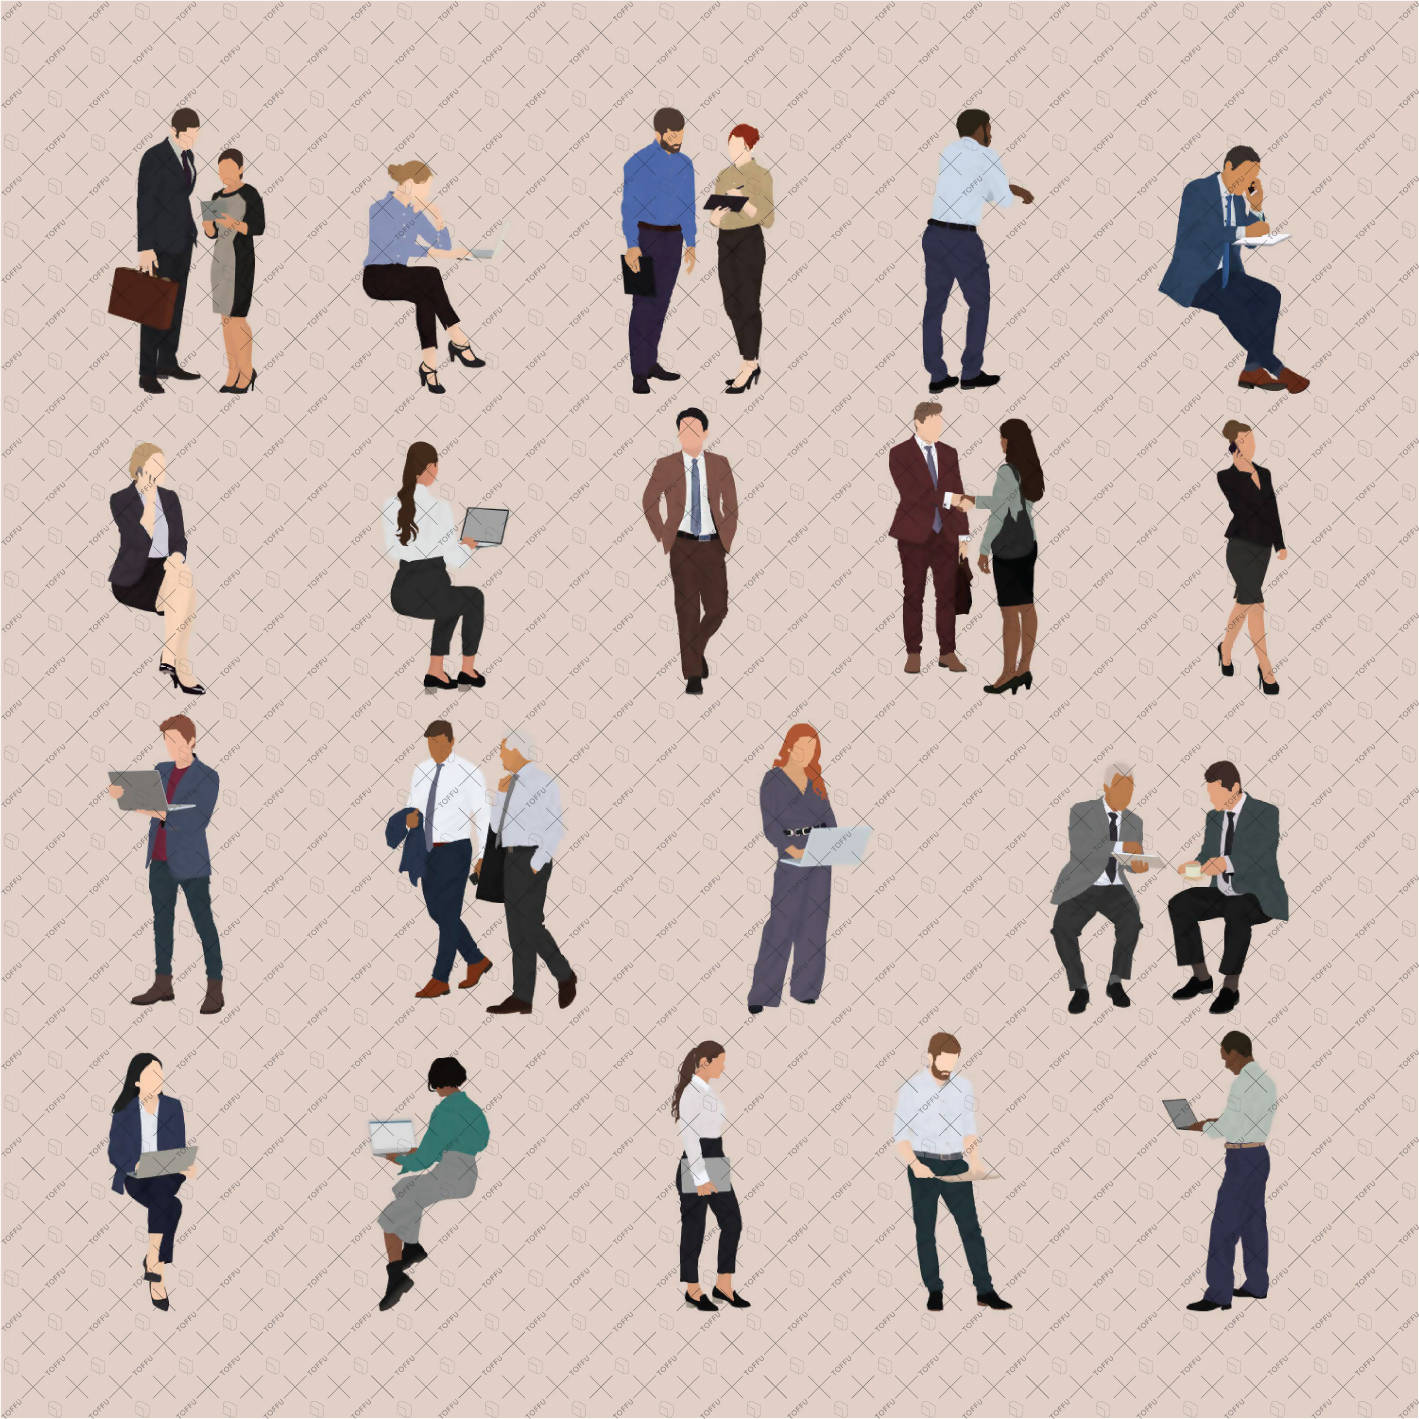 office people vector